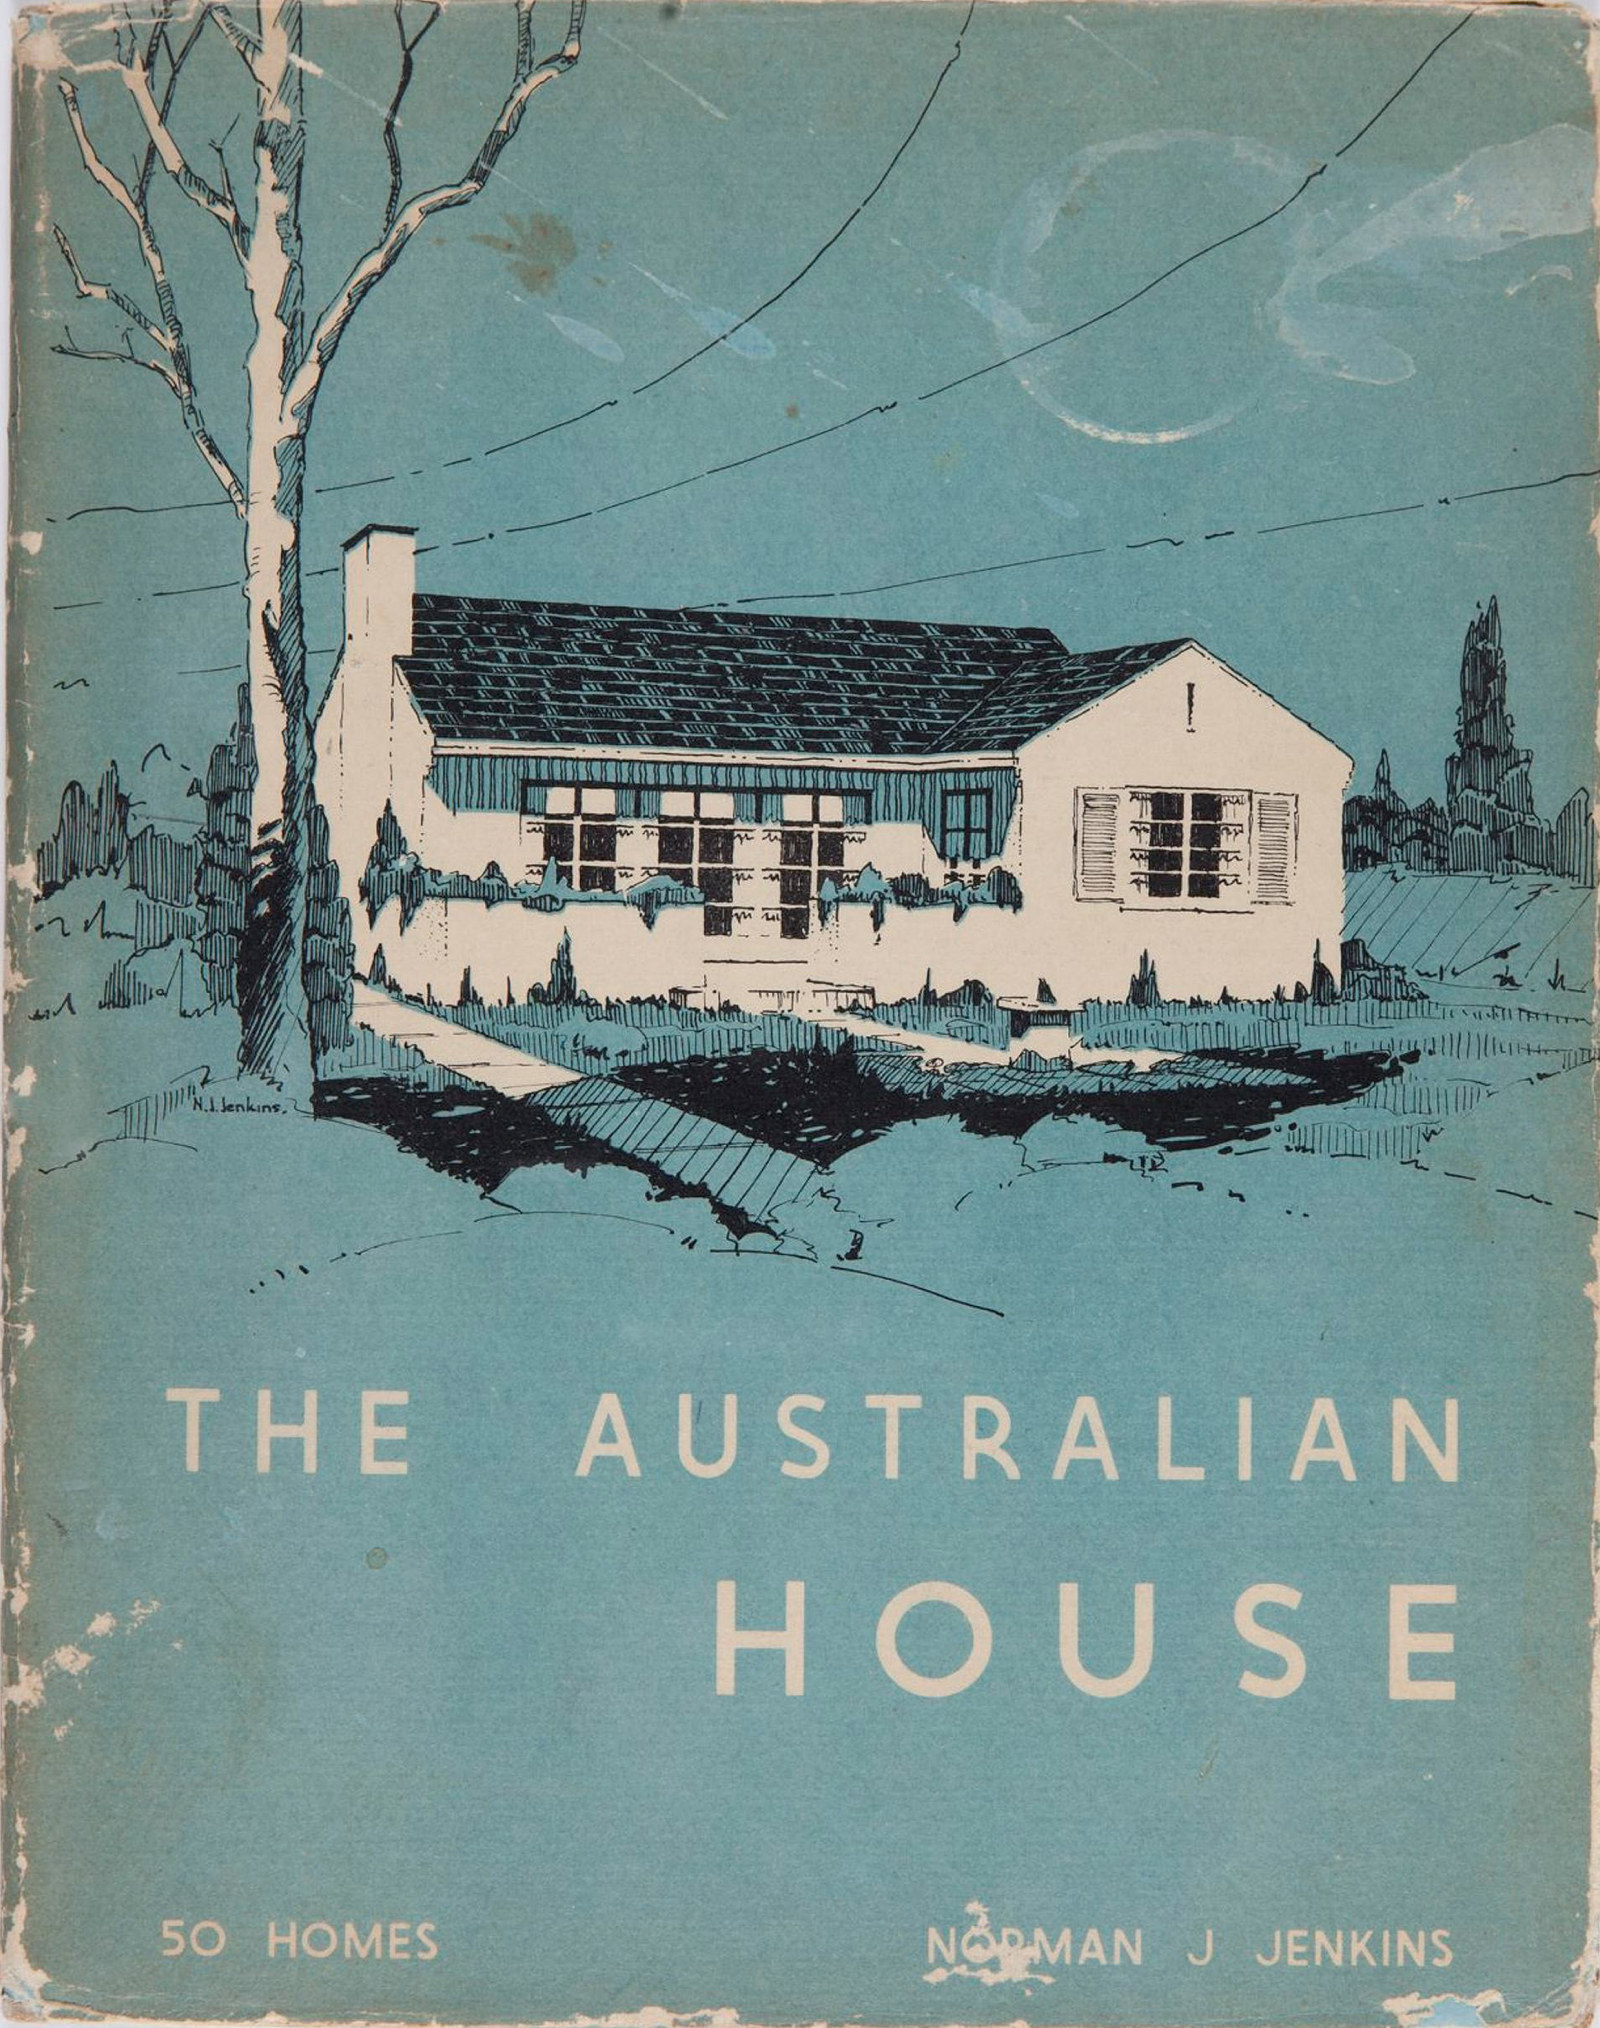 Cover of book, green background with drawing of house in white and black.